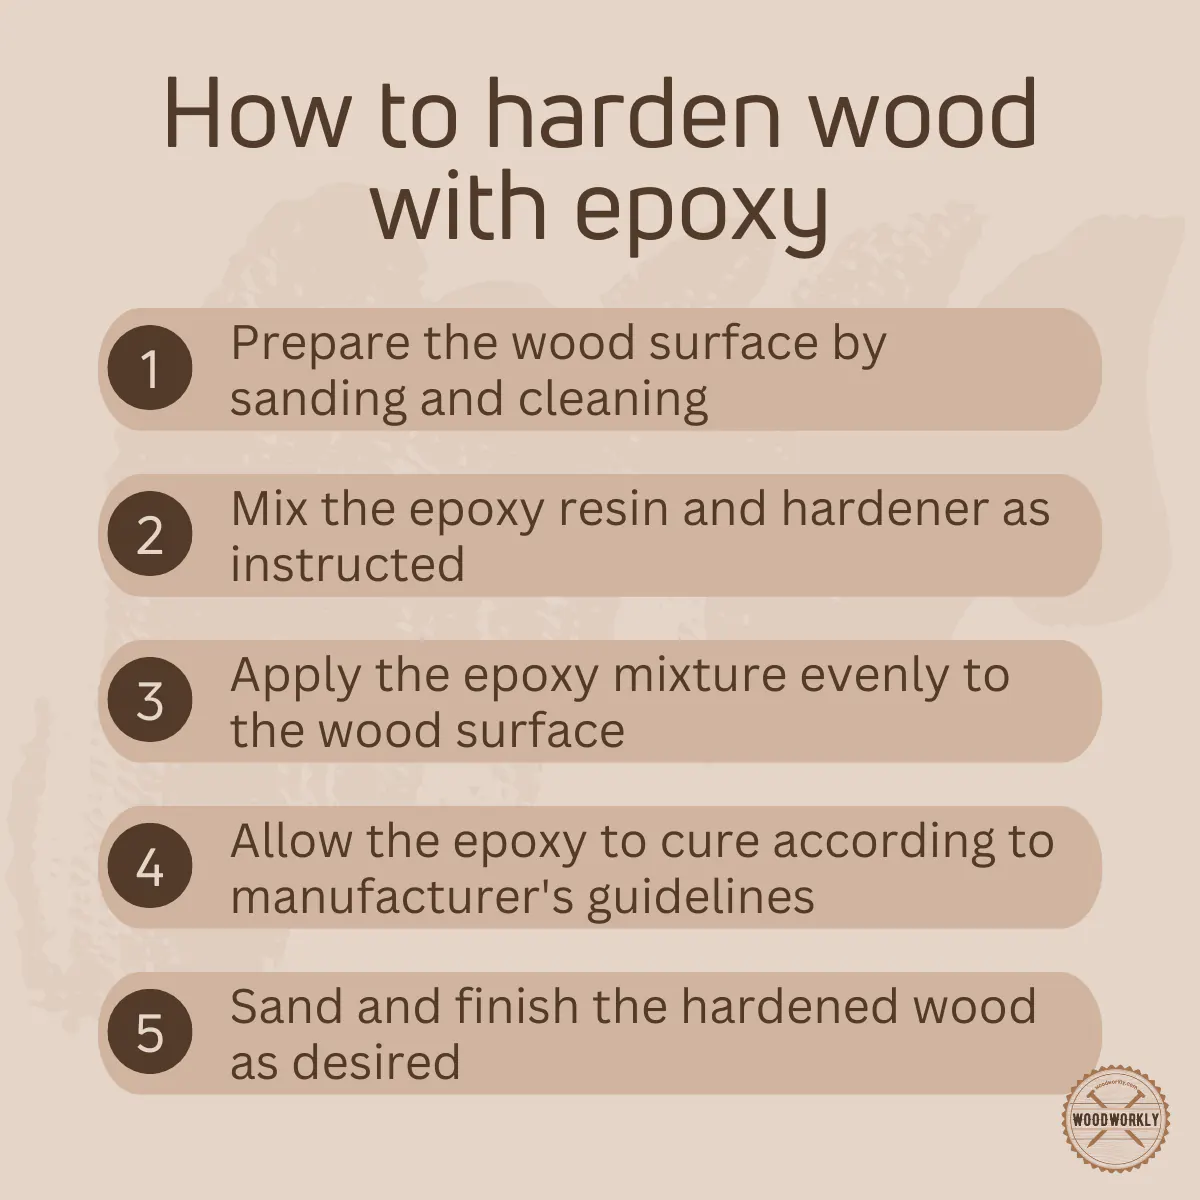 How to harden wood with epoxy